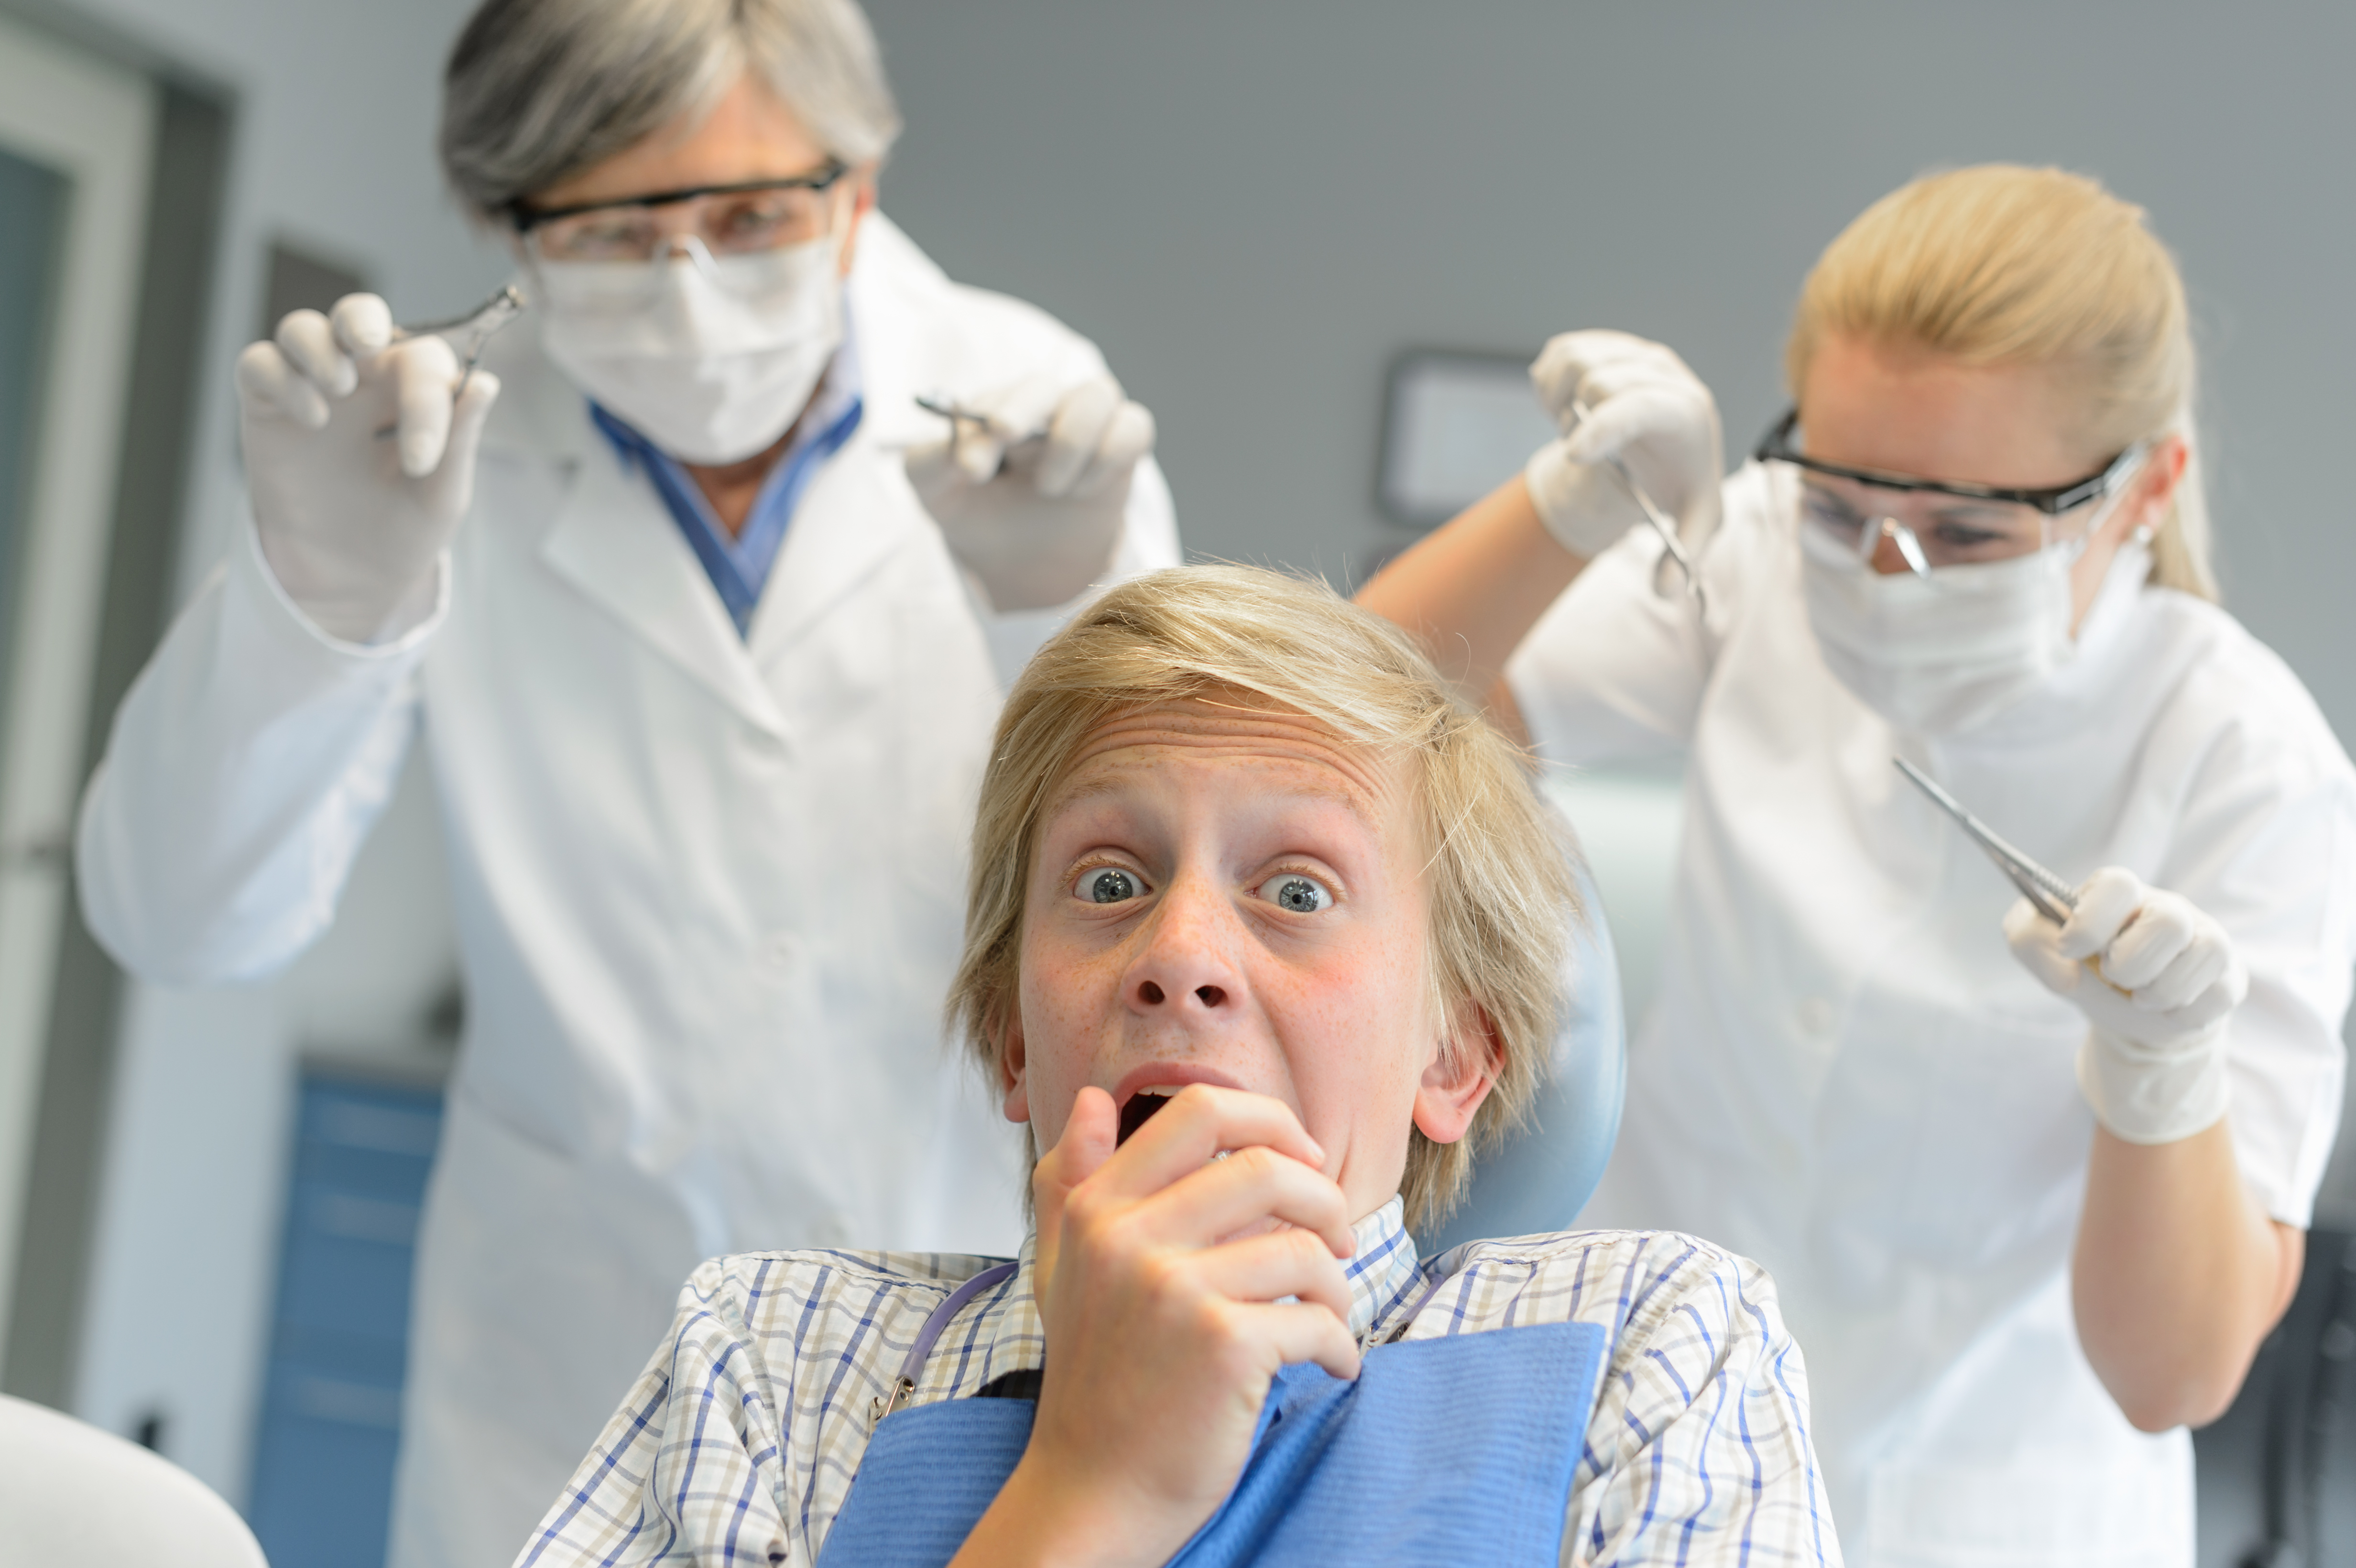 You don’t have to be a scaredy-cat anymore! We know how to make your dental visit stress-free – get the facts about dental sedation!